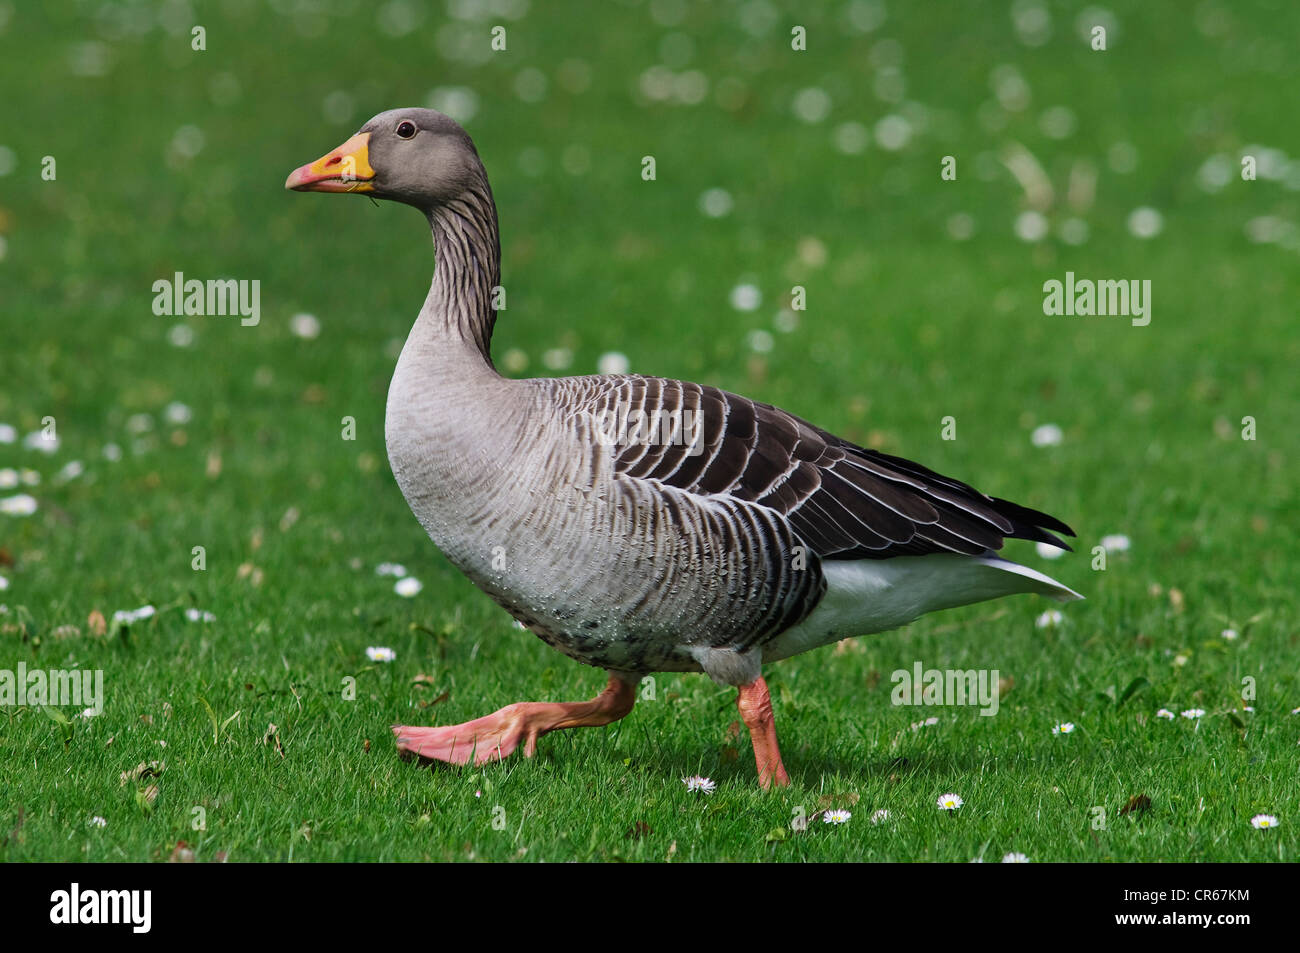 Greylag or Graylag goose (Anser anser), walking on a meadow Stock Photo